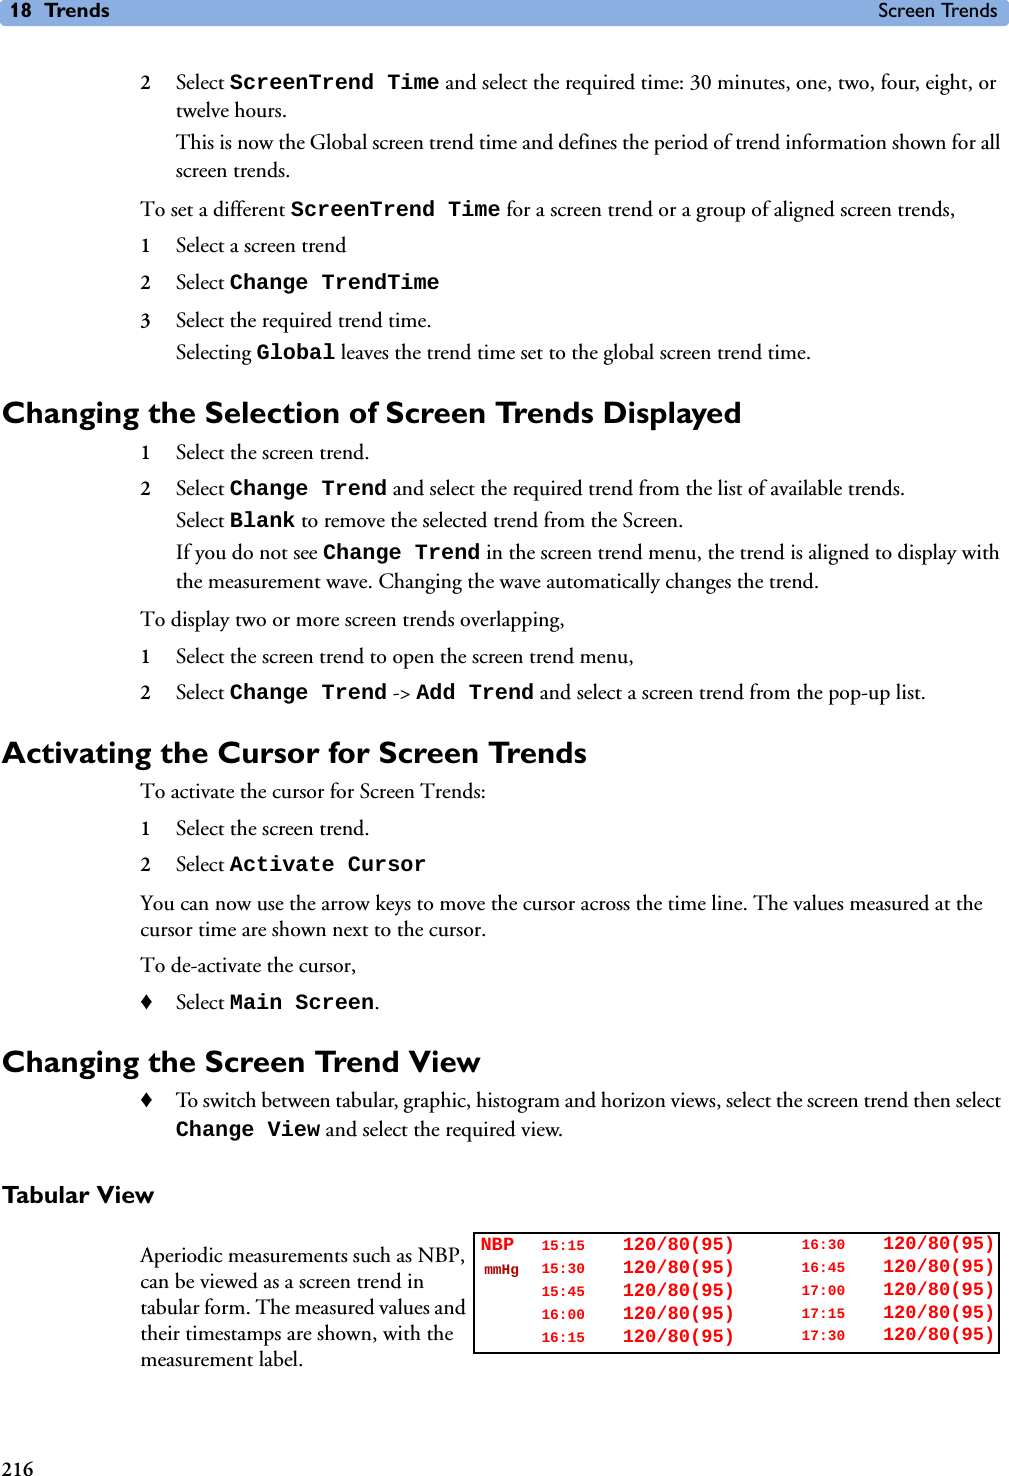 18 Trends Screen Trends2162Select ScreenTrend Time and select the required time: 30 minutes, one, two, four, eight, or twelve hours.This is now the Global screen trend time and defines the period of trend information shown for all screen trends. To set a different ScreenTrend Time for a screen trend or a group of aligned screen trends,1Select a screen trend2Select Change TrendTime3Select the required trend time.Selecting Global leaves the trend time set to the global screen trend time. Changing the Selection of Screen Trends Displayed1Select the screen trend.2Select Change Trend and select the required trend from the list of available trends.Select Blank to remove the selected trend from the Screen. If you do not see Change Trend in the screen trend menu, the trend is aligned to display with the measurement wave. Changing the wave automatically changes the trend. To display two or more screen trends overlapping, 1Select the screen trend to open the screen trend menu, 2Select Change Trend -&gt; Add Trend and select a screen trend from the pop-up list. Activating the Cursor for Screen TrendsTo activate the cursor for Screen Trends:1Select the screen trend.2Select Activate CursorYou can now use the arrow keys to move the cursor across the time line. The values measured at the cursor time are shown next to the cursor. To de-activate the cursor,♦Select Main Screen.Changing the Screen Trend View ♦To switch between tabular, graphic, histogram and horizon views, select the screen trend then select Change View and select the required view. Tabular ViewAperiodic measurements such as NBP, can be viewed as a screen trend in tabular form. The measured values and their timestamps are shown, with the measurement label.16:30 120/80(95)16:45 120/80(95)17:00 120/80(95)17:15 120/80(95)17:30 120/80(95)15:15 120/80(95)15:30 120/80(95)15:45 120/80(95)16:00 120/80(95)16:15 120/80(95)NBPmmHg